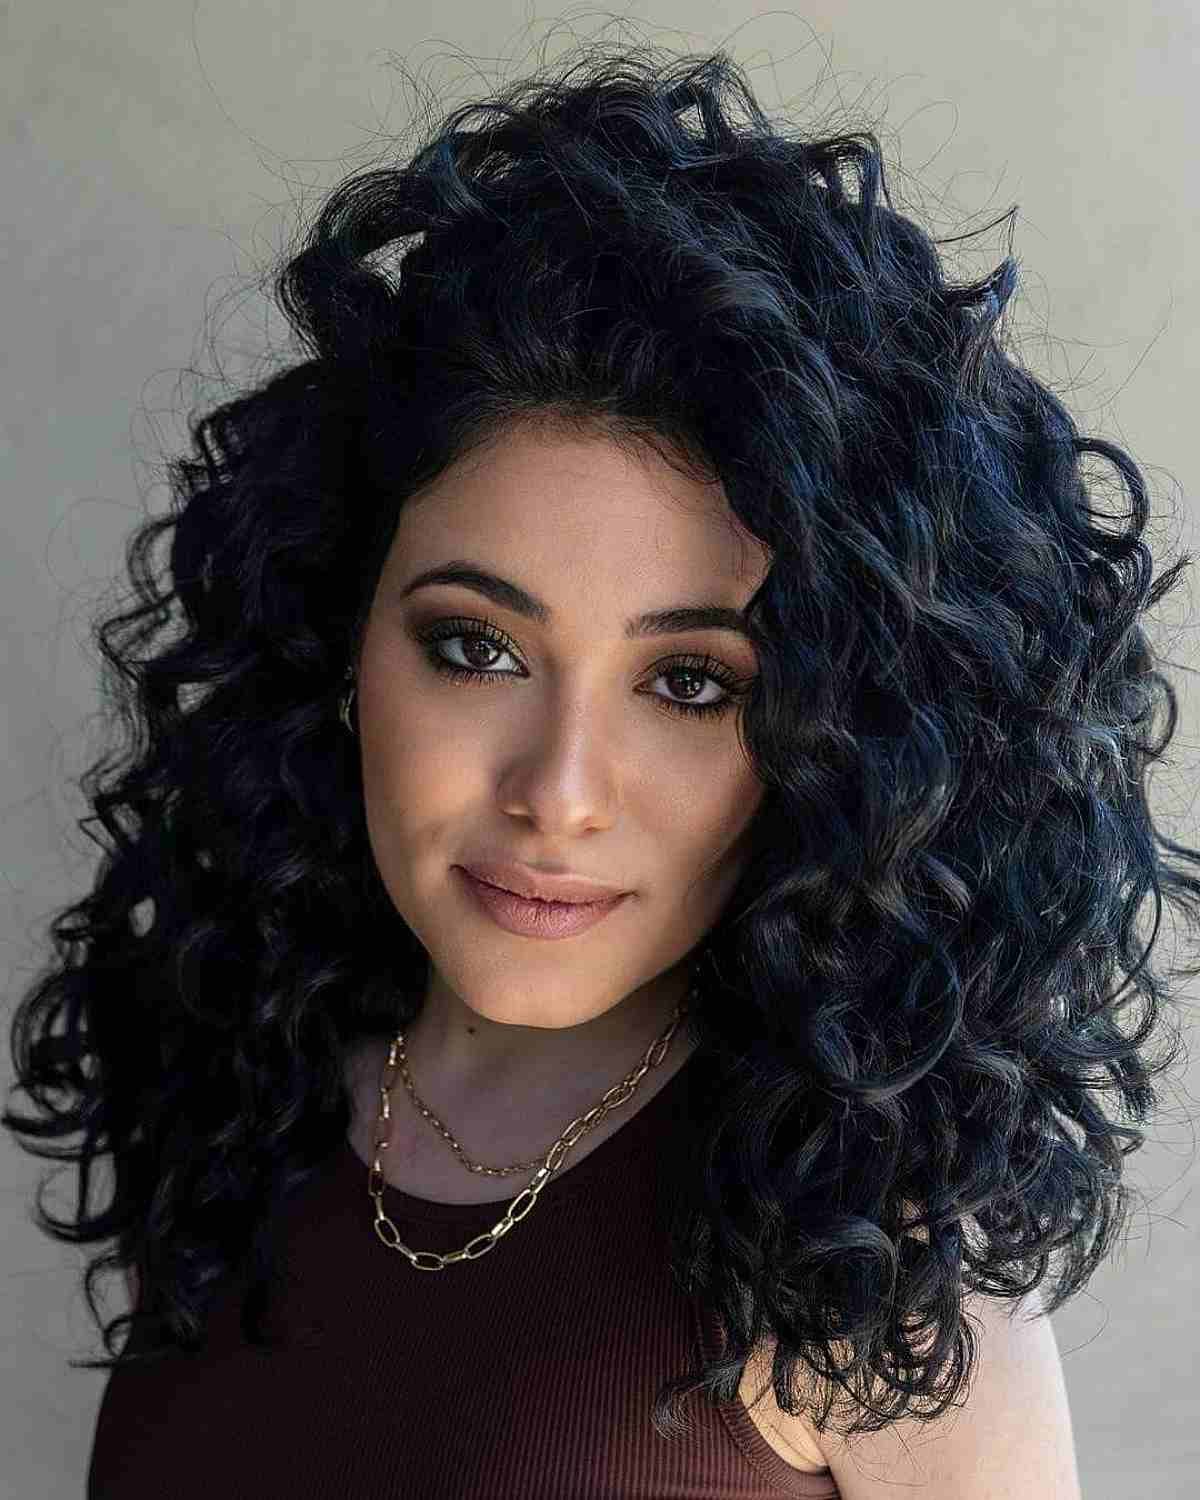 62 Best Shoulder Length Curly Hair Cuts & Styles In 2022 Throughout Recent Medium Length Curly Haircuts (View 18 of 25)